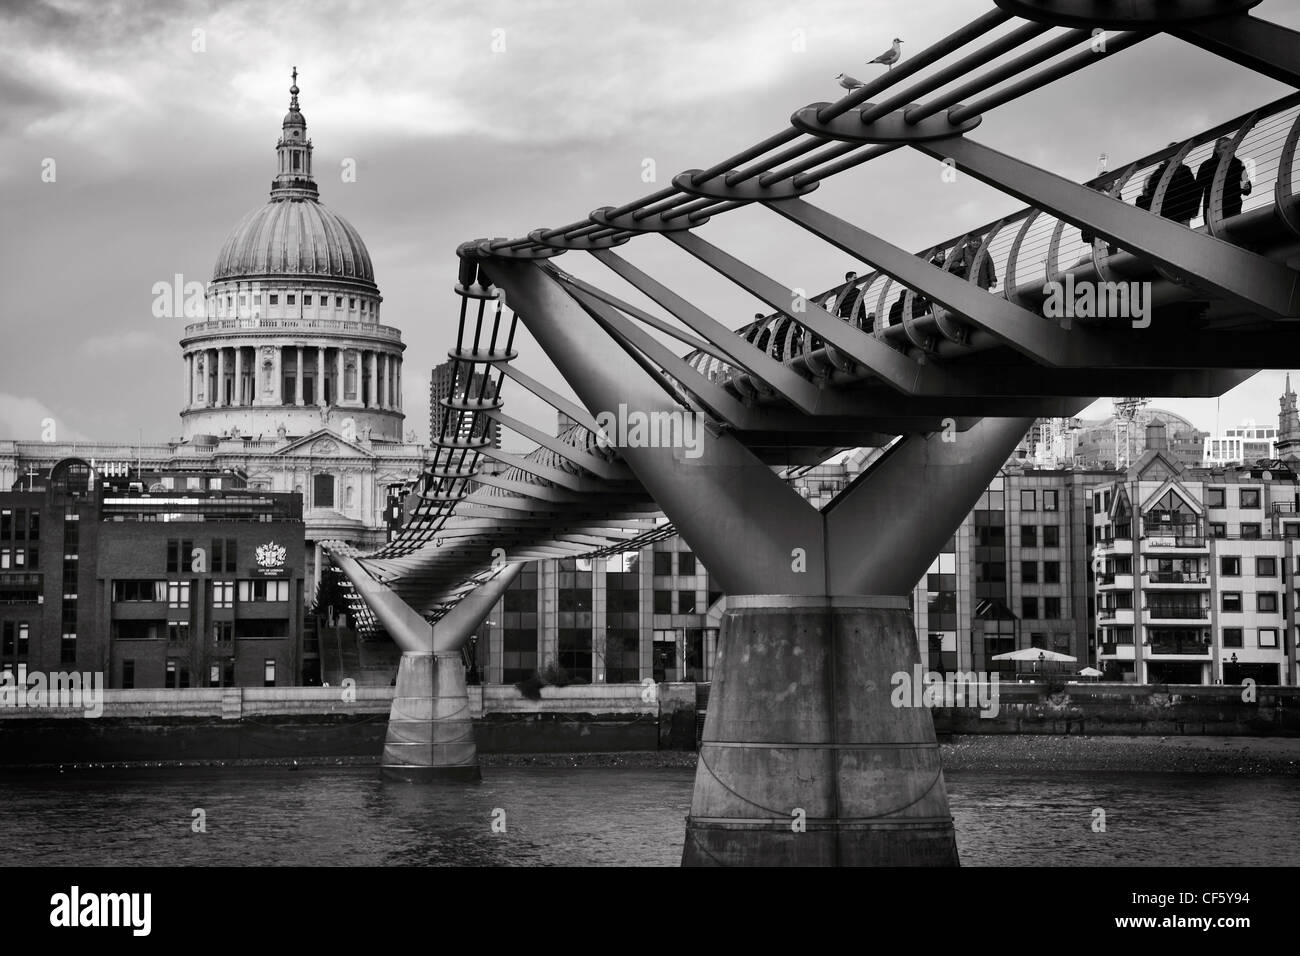 St Paul's Cathedral and the London Millennium Footbridge, crossing the River Thames to link Bankside with the City of London. Stock Photo